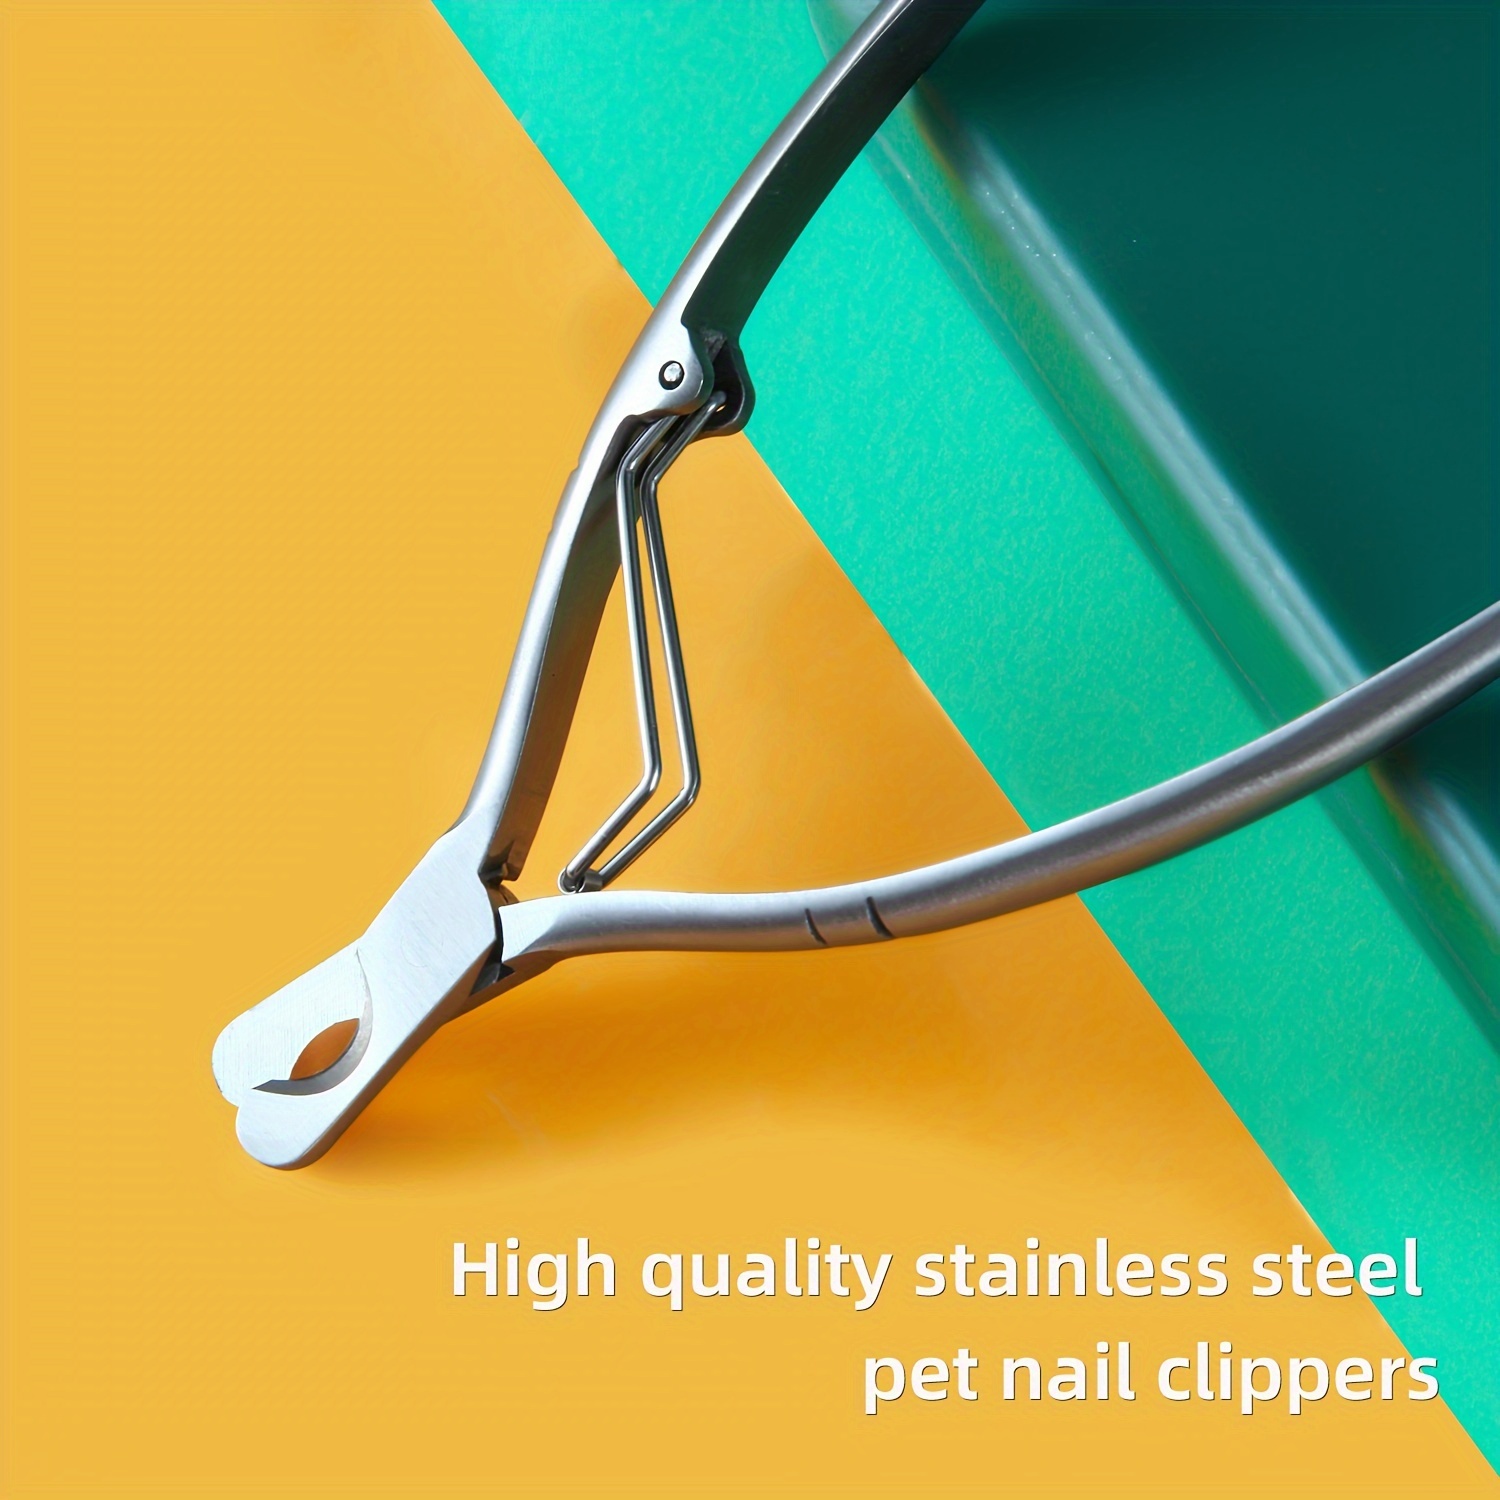 

1pc Professional Stainless Steel Pet Nail Clippers, Crescent Cut With Safety Blood Line Stop, Activity Spring Scissors For Dogs & Cats Grooming Tools